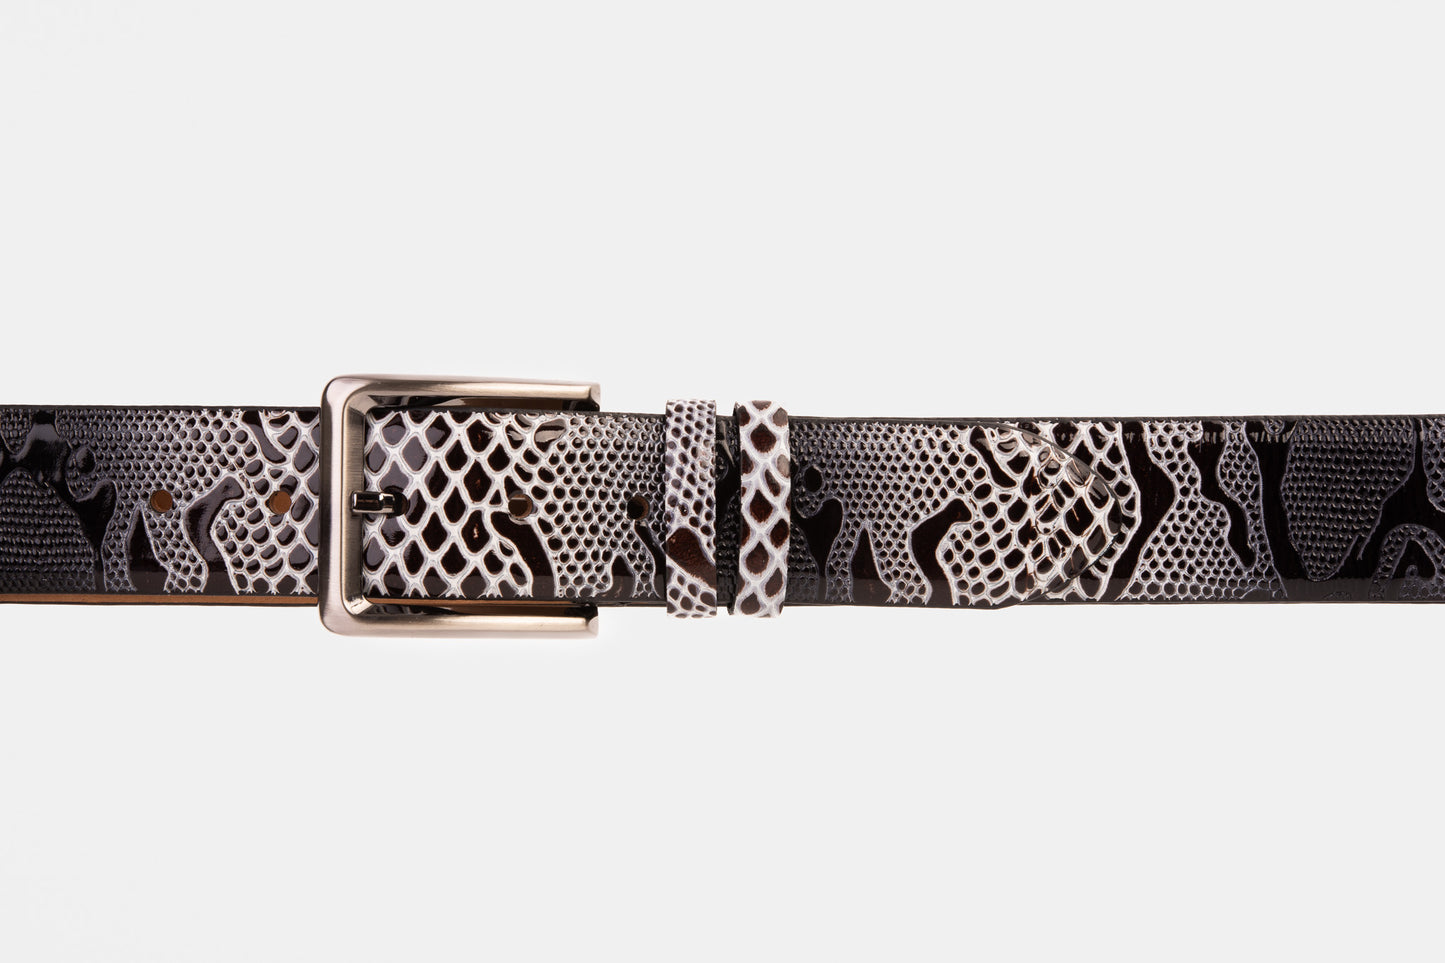 The Milano Black/White Leather Belt Limited Edition